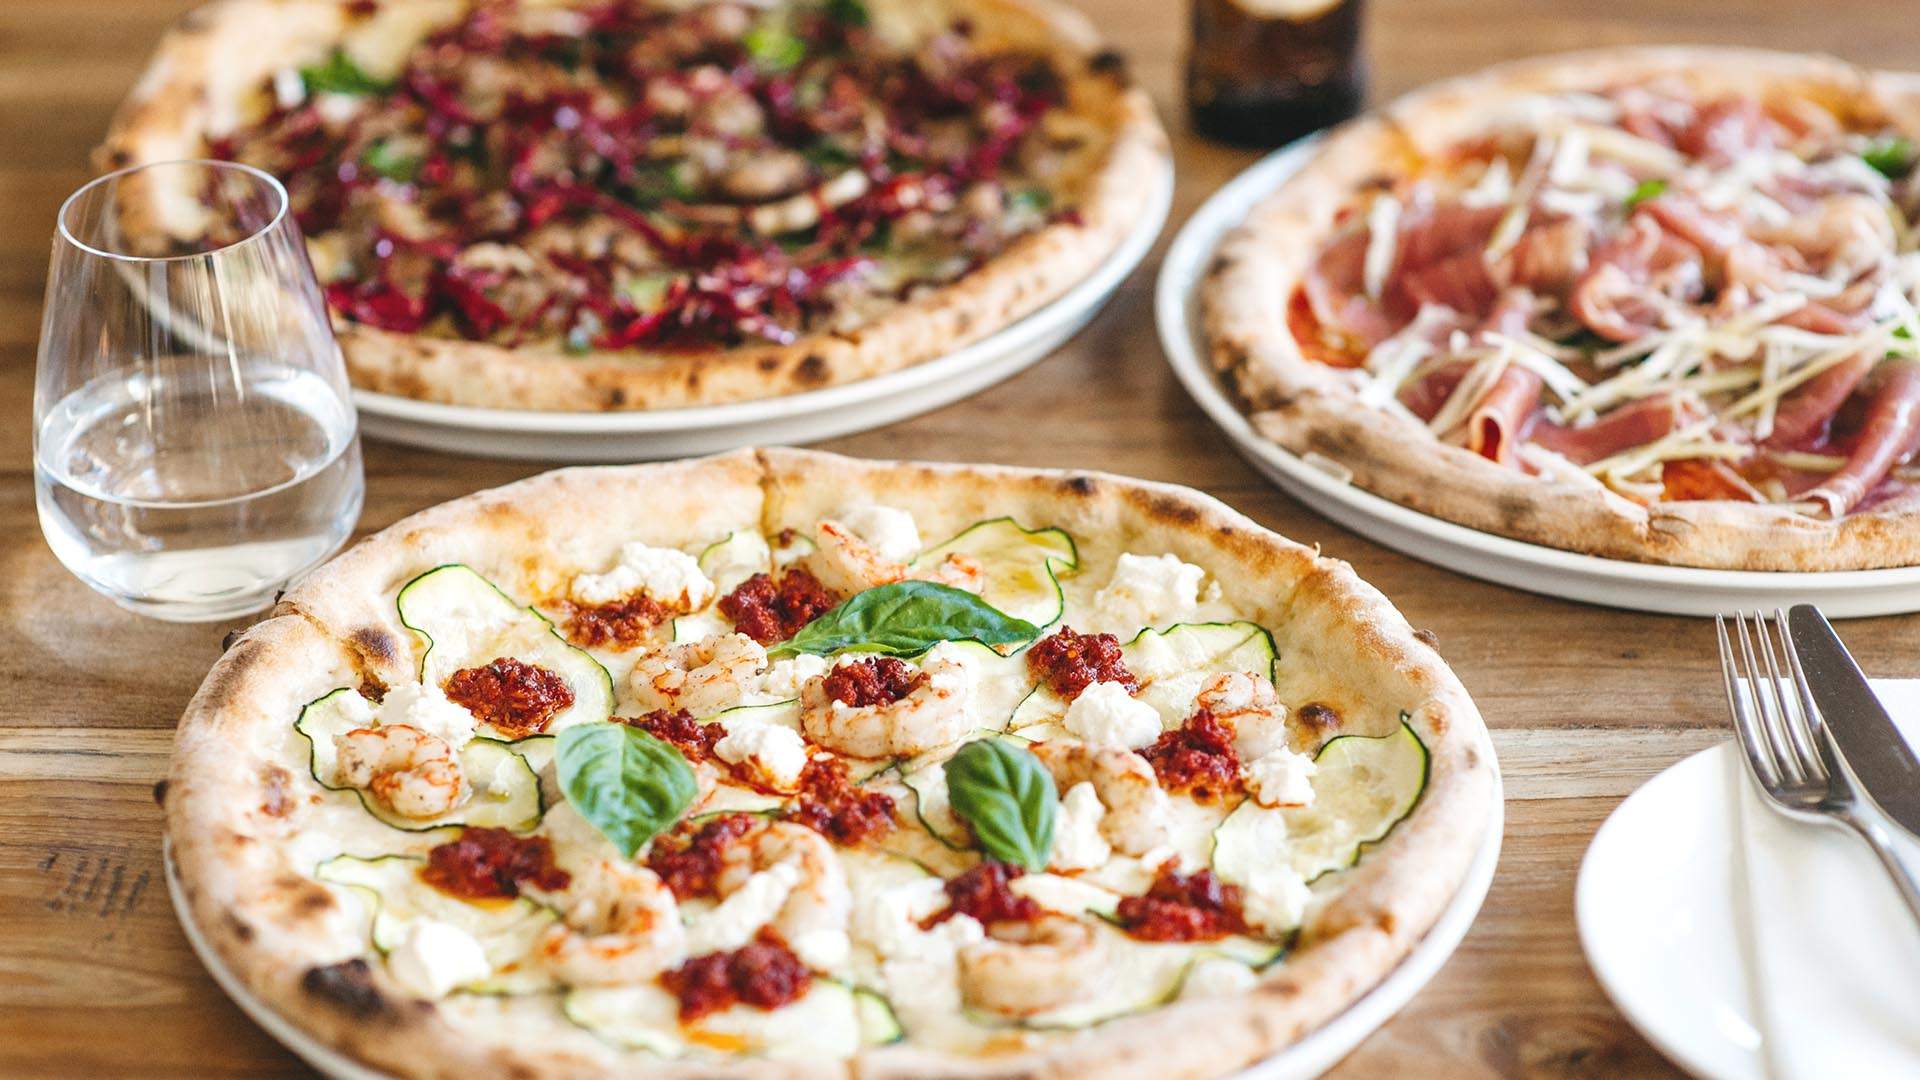 Salt Meats Cheese Has Opened a New Flagship Restaurant in Circular Quay